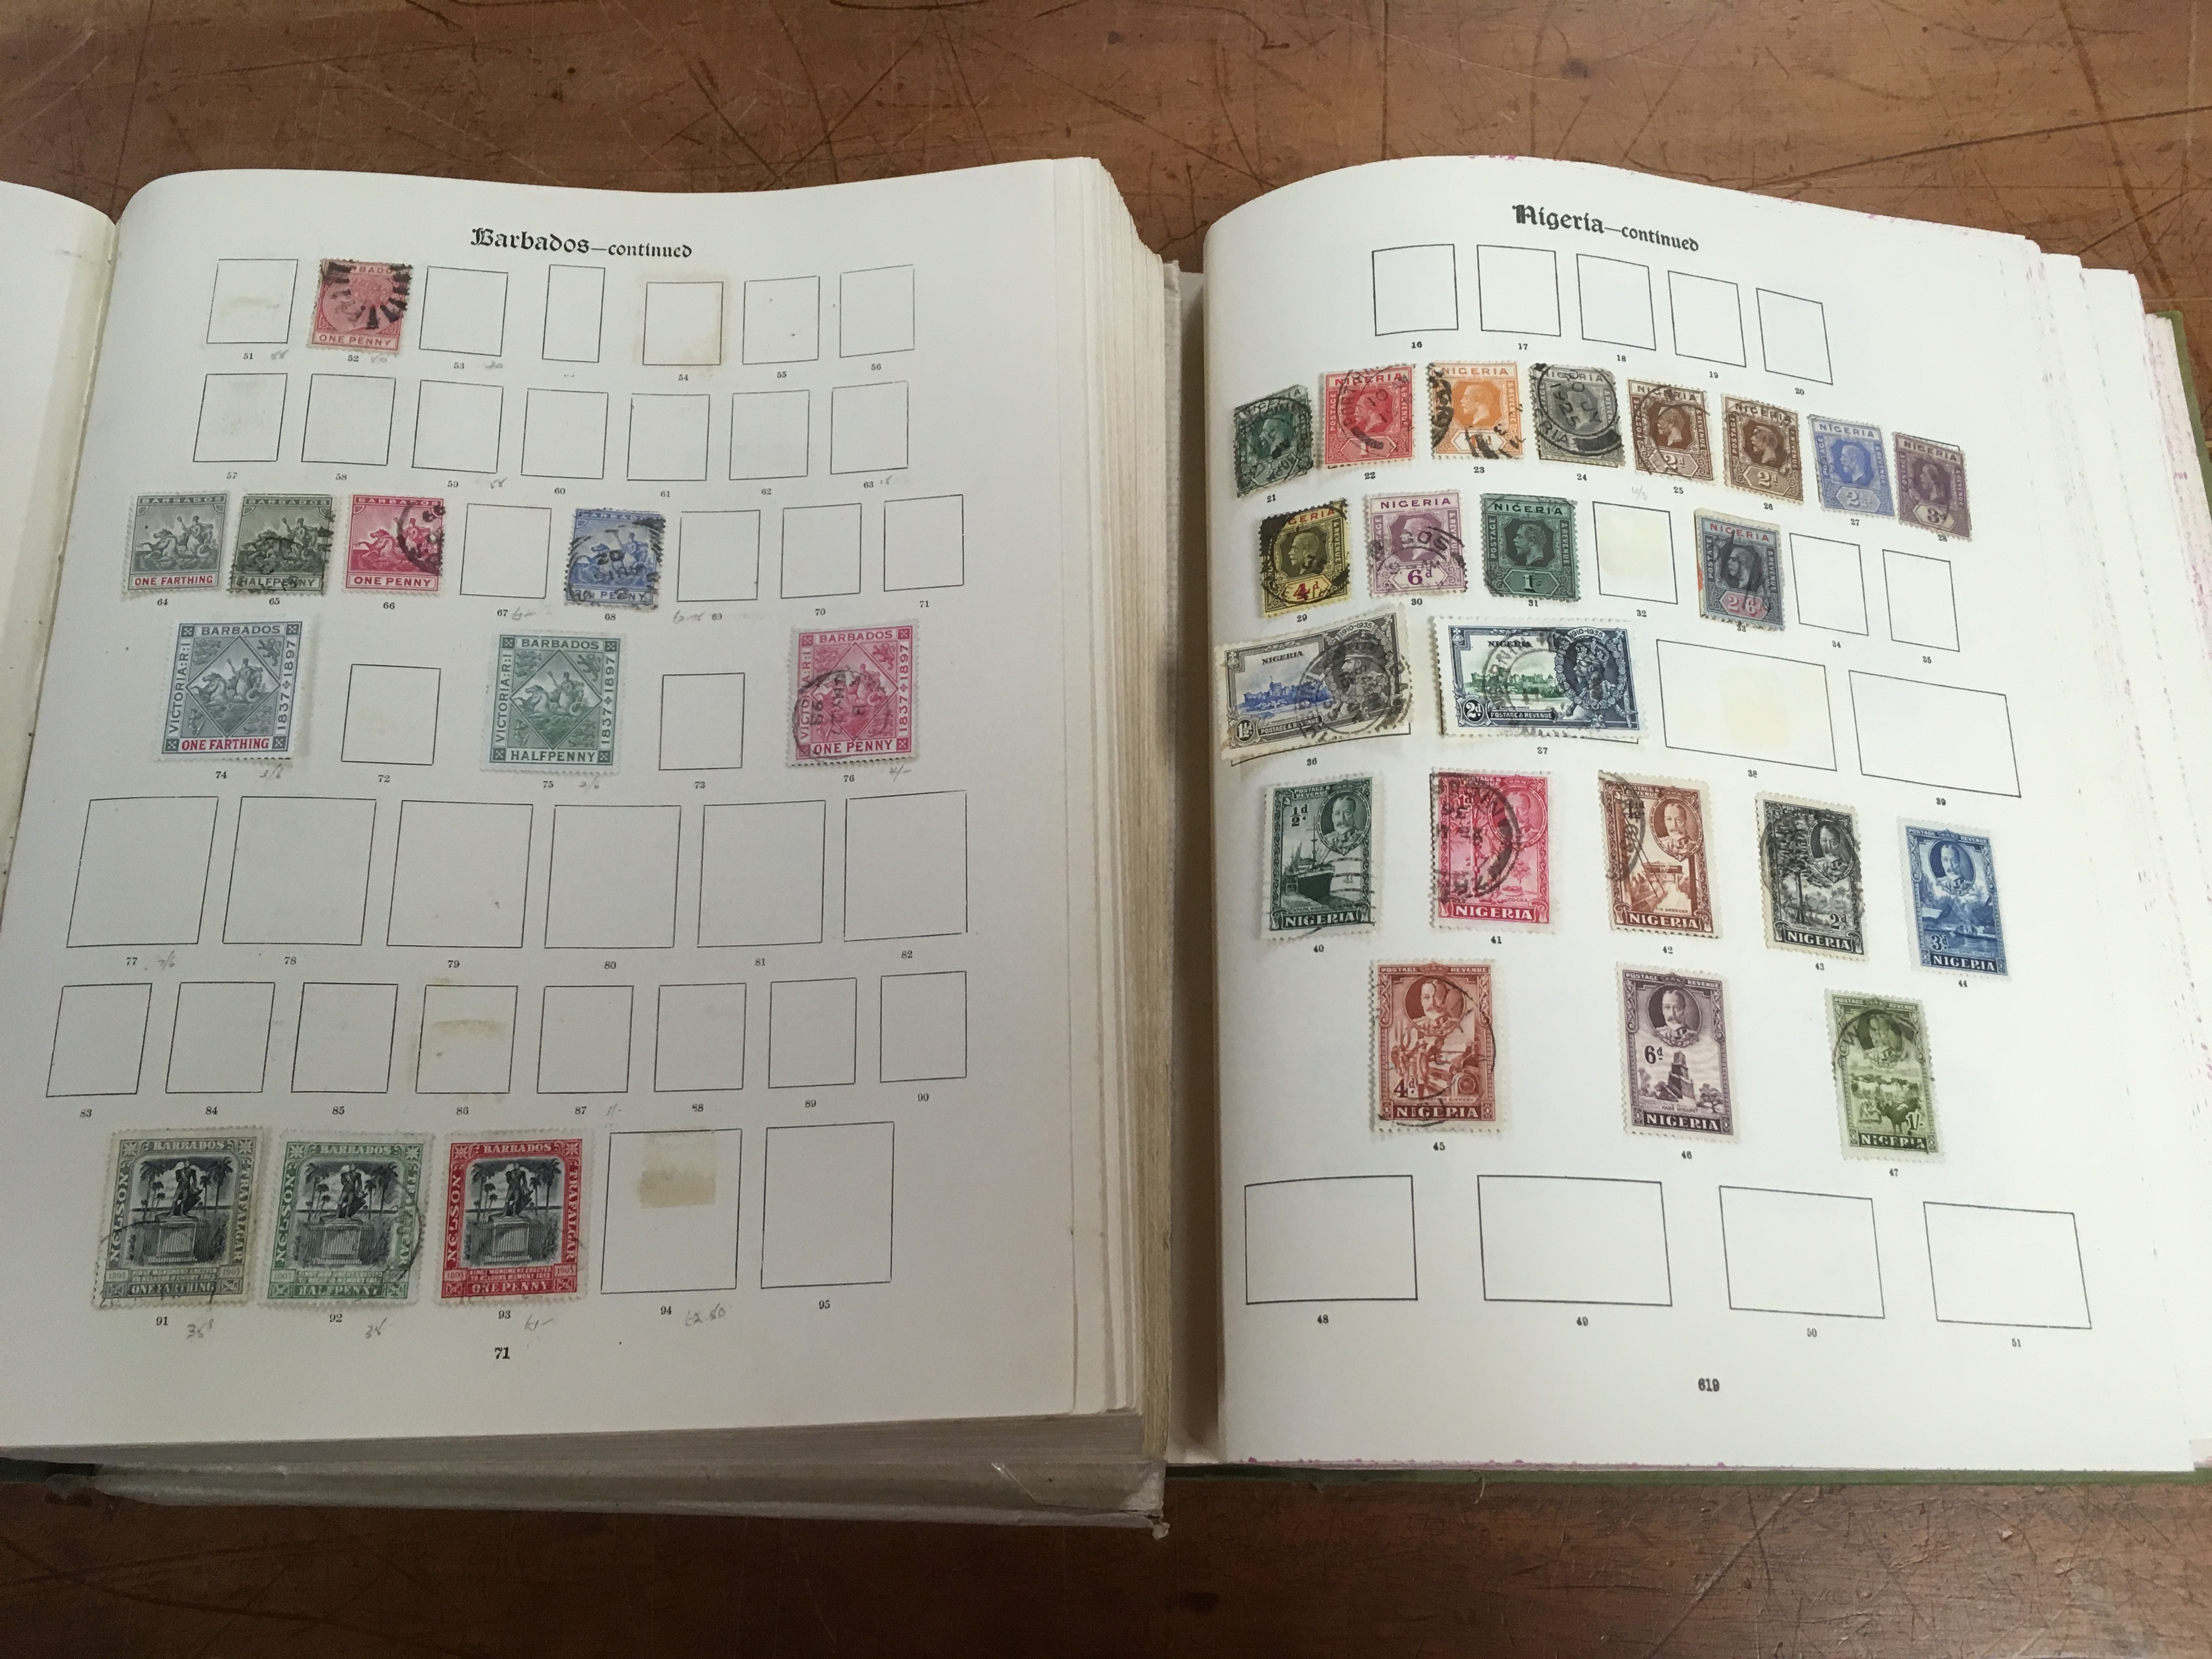 SG NEW IMPERIAL ALBUMS, BOTH VOLUMES WITH A REMAINDERED COLLECTION, A FEW HUNDRED STAMPS REMAIN. - Image 4 of 4